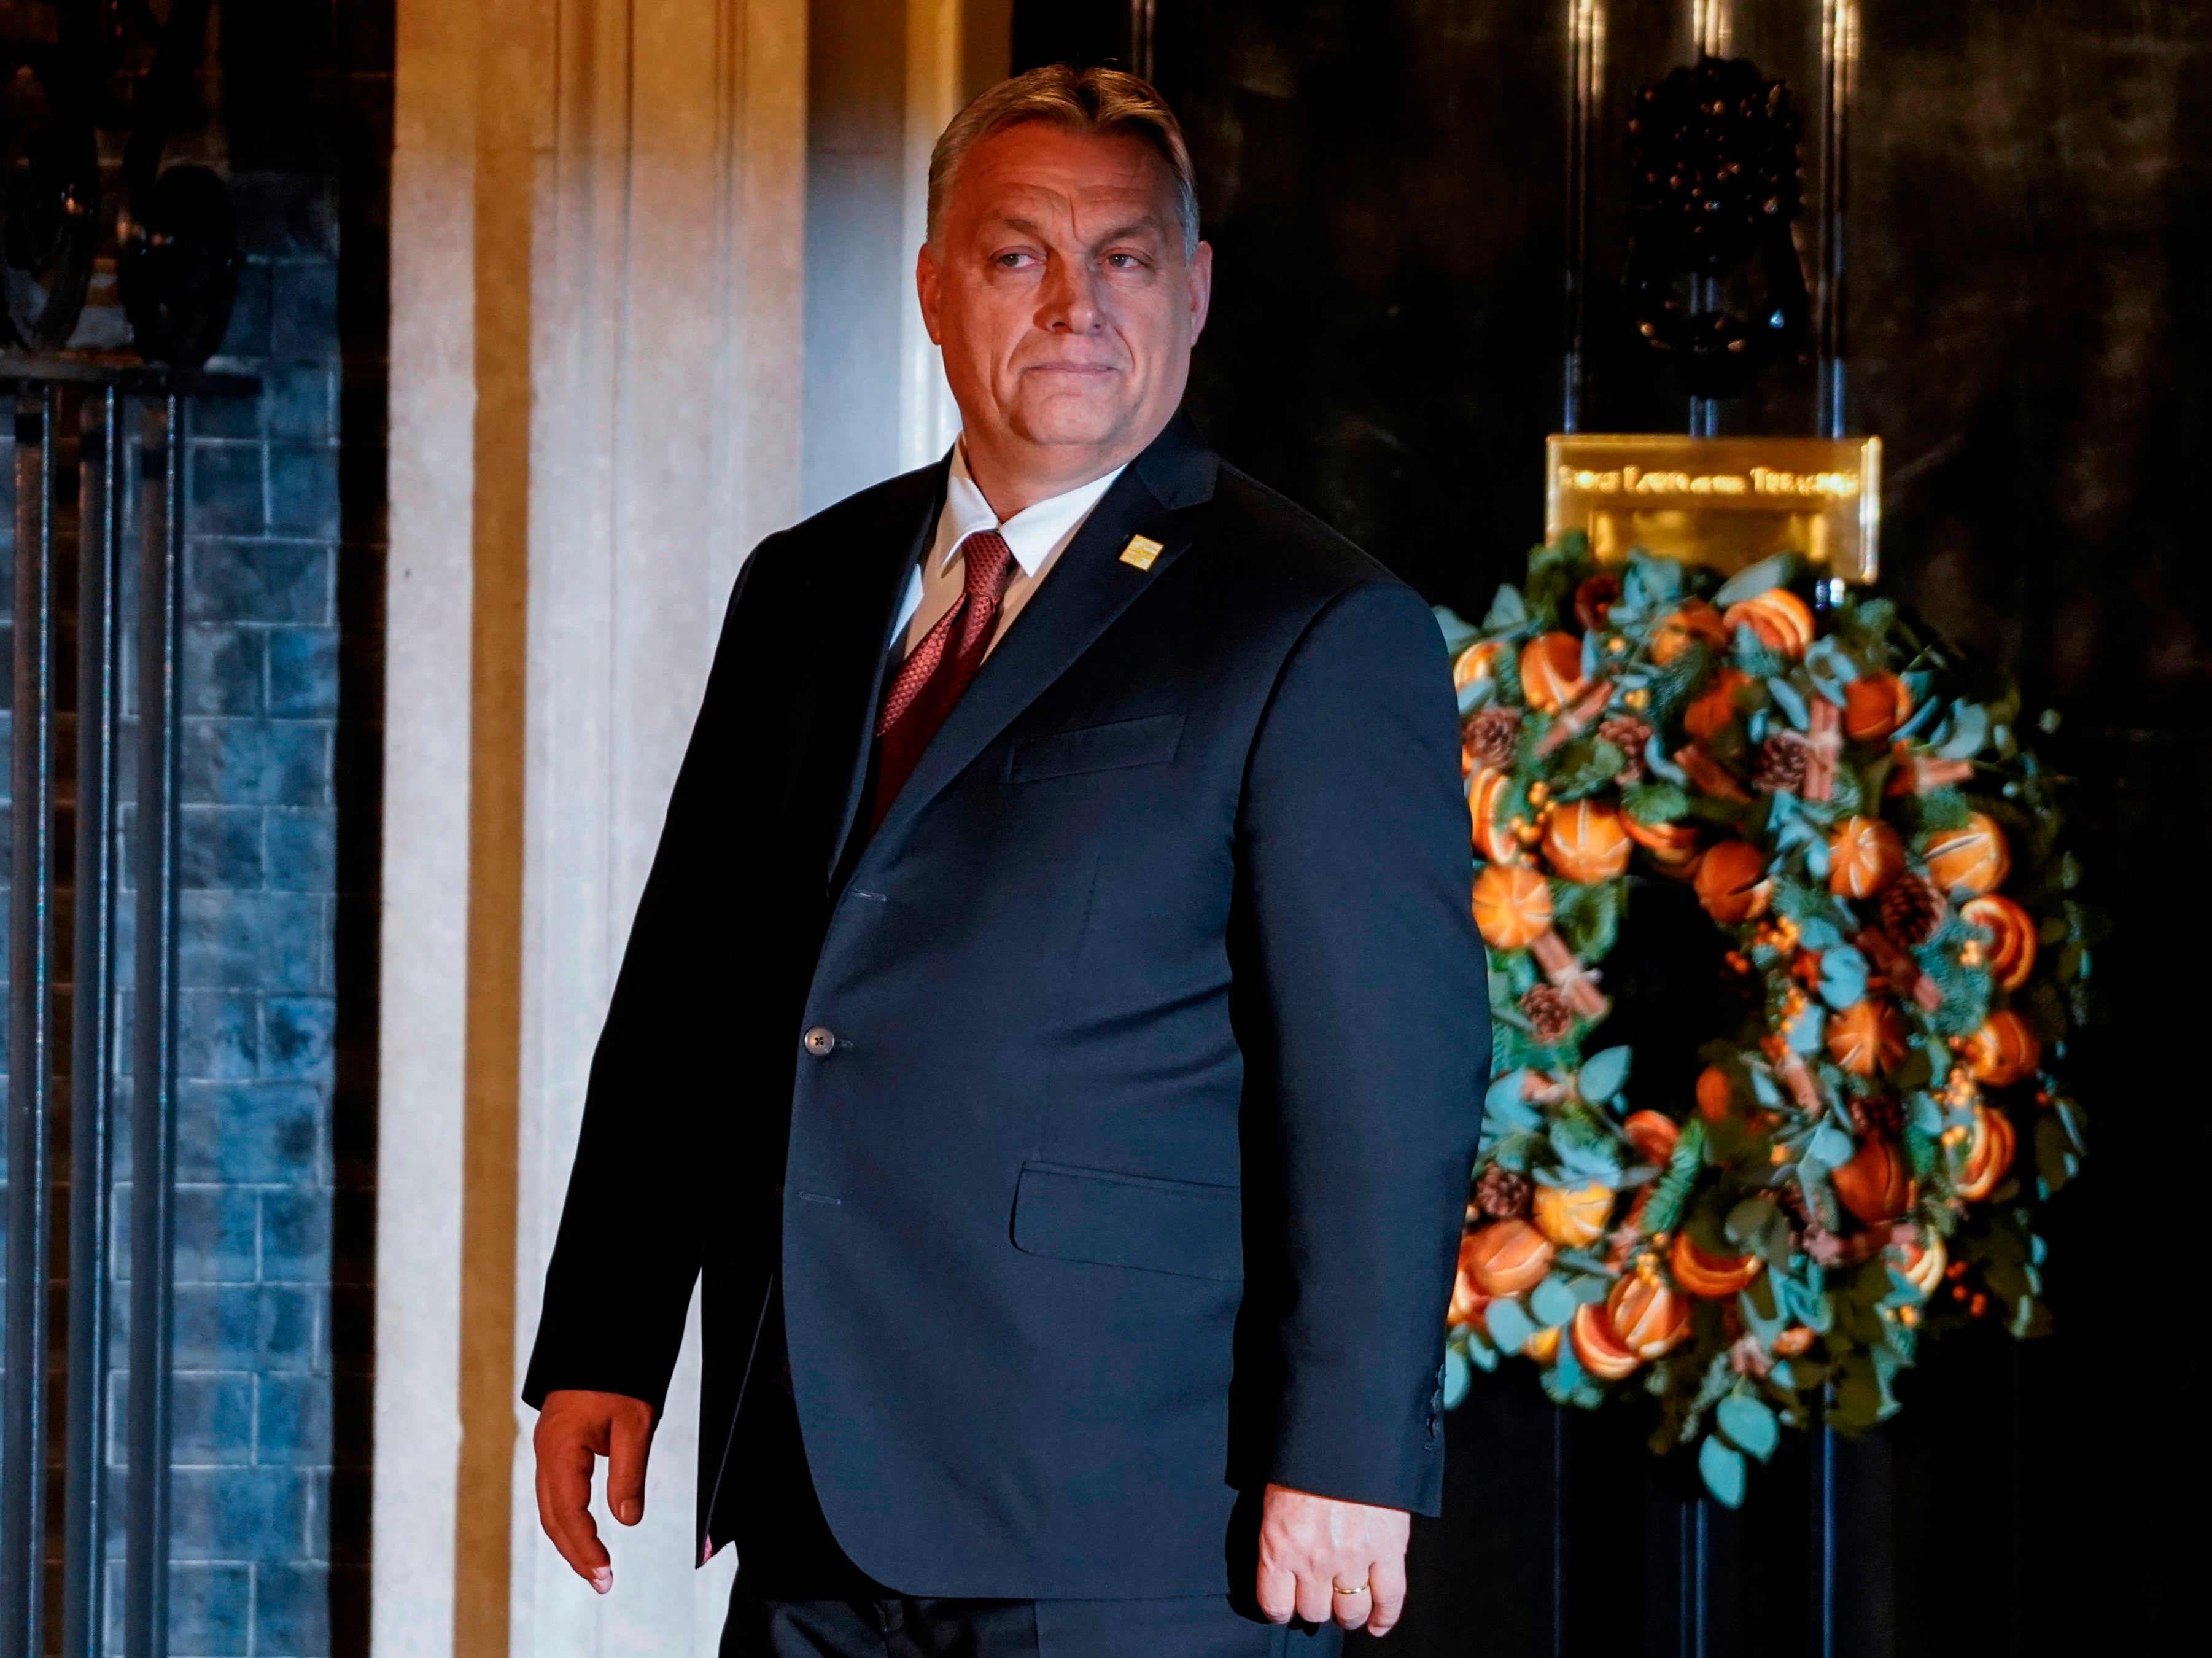 Viktor Orban arrives at 10 Downing Street in central London in December 2019 ahead of a Nato summit